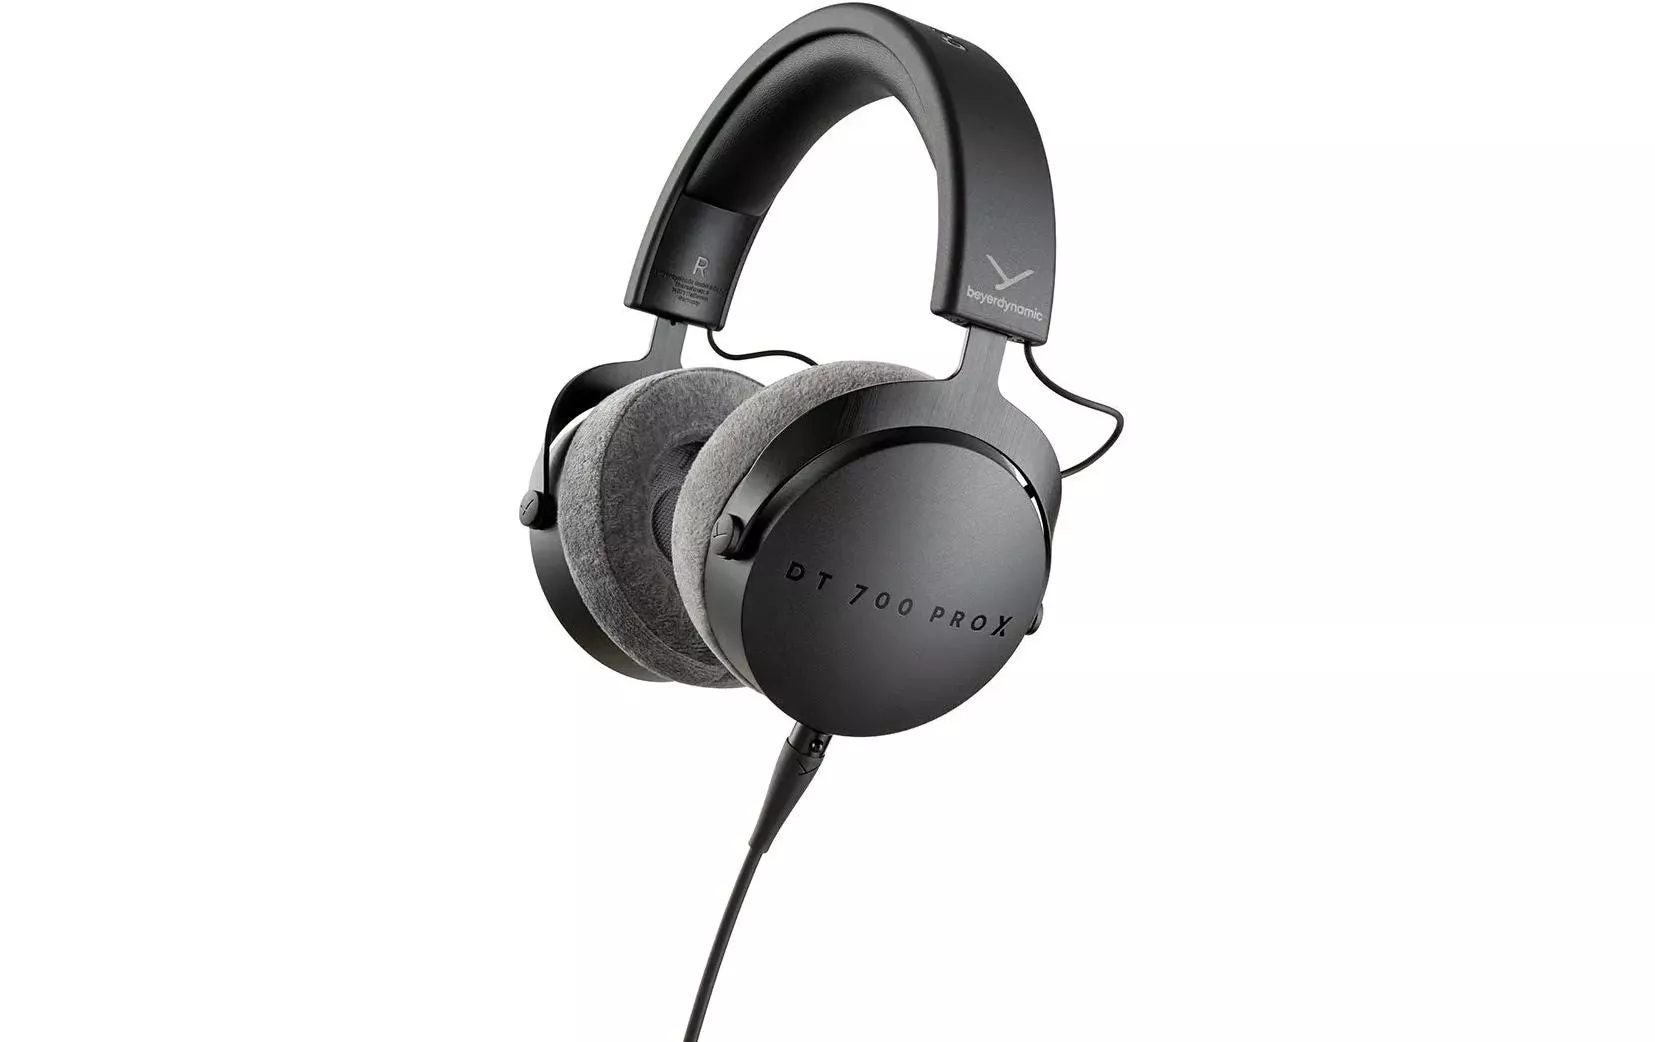 DT 700 Pro X Cuffie over-ear nere